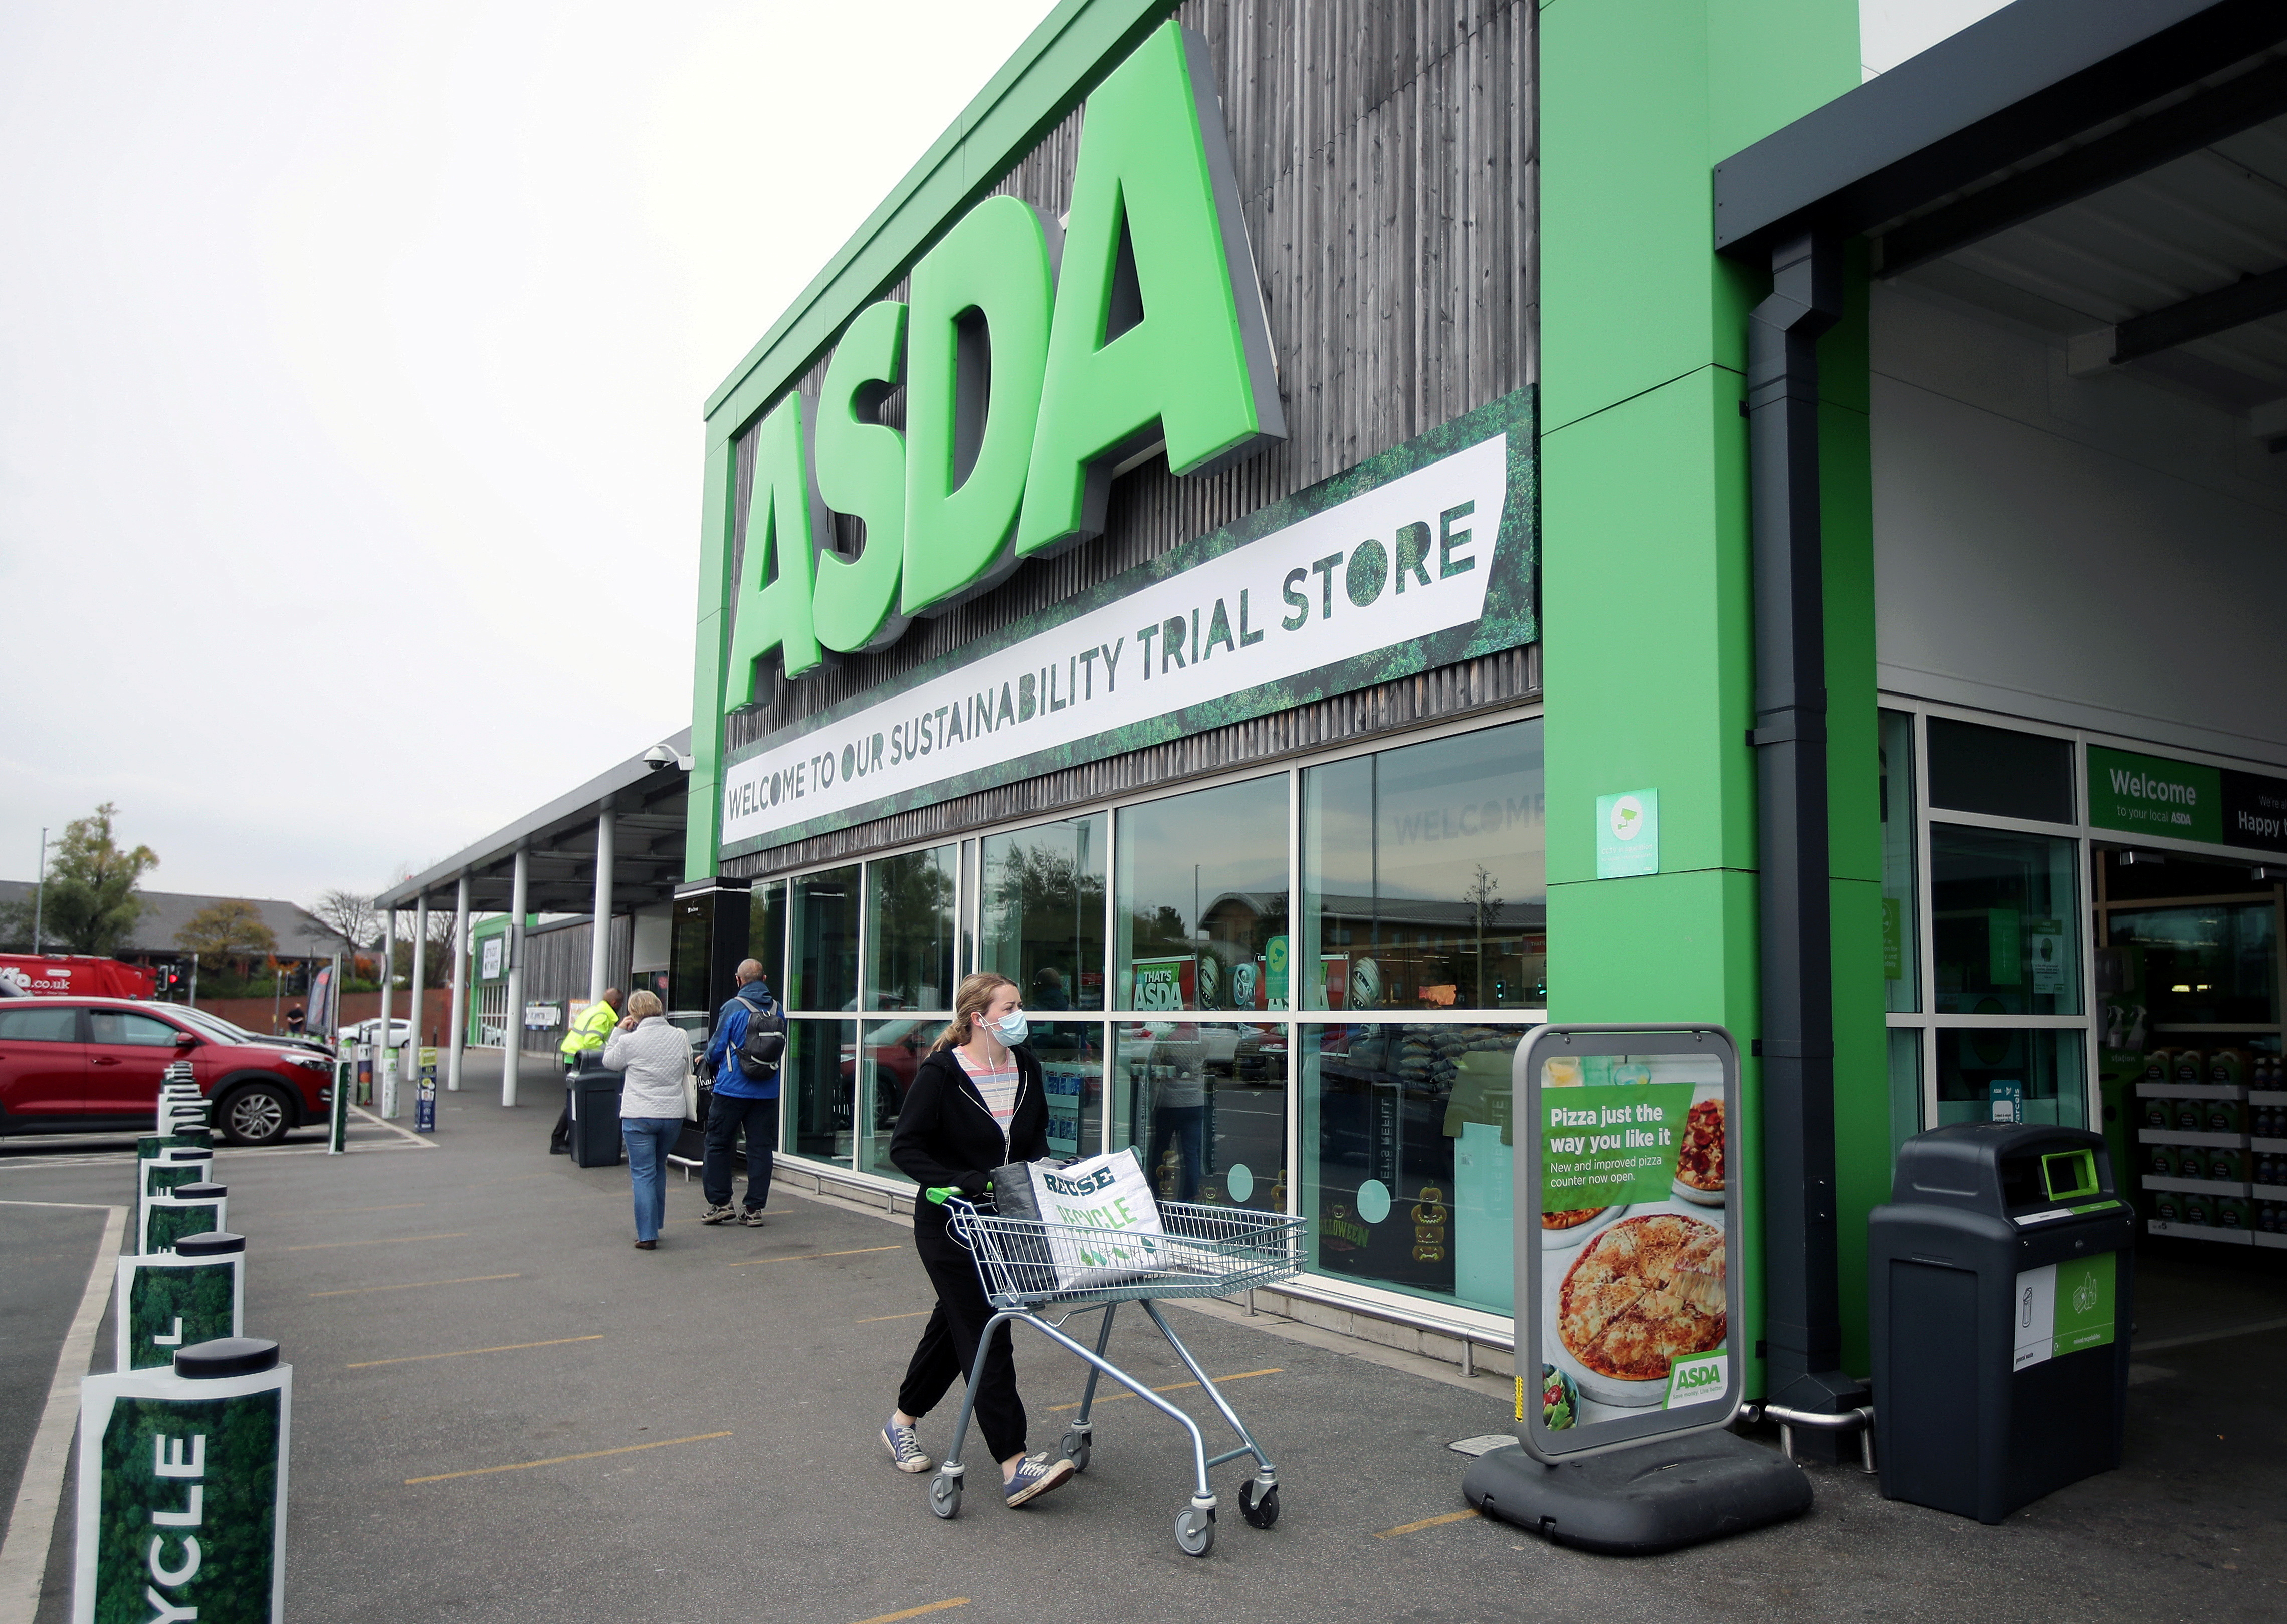 A general view shows the UK supermarket Asda, as the store launches a new sustainability strategy, in Leeds